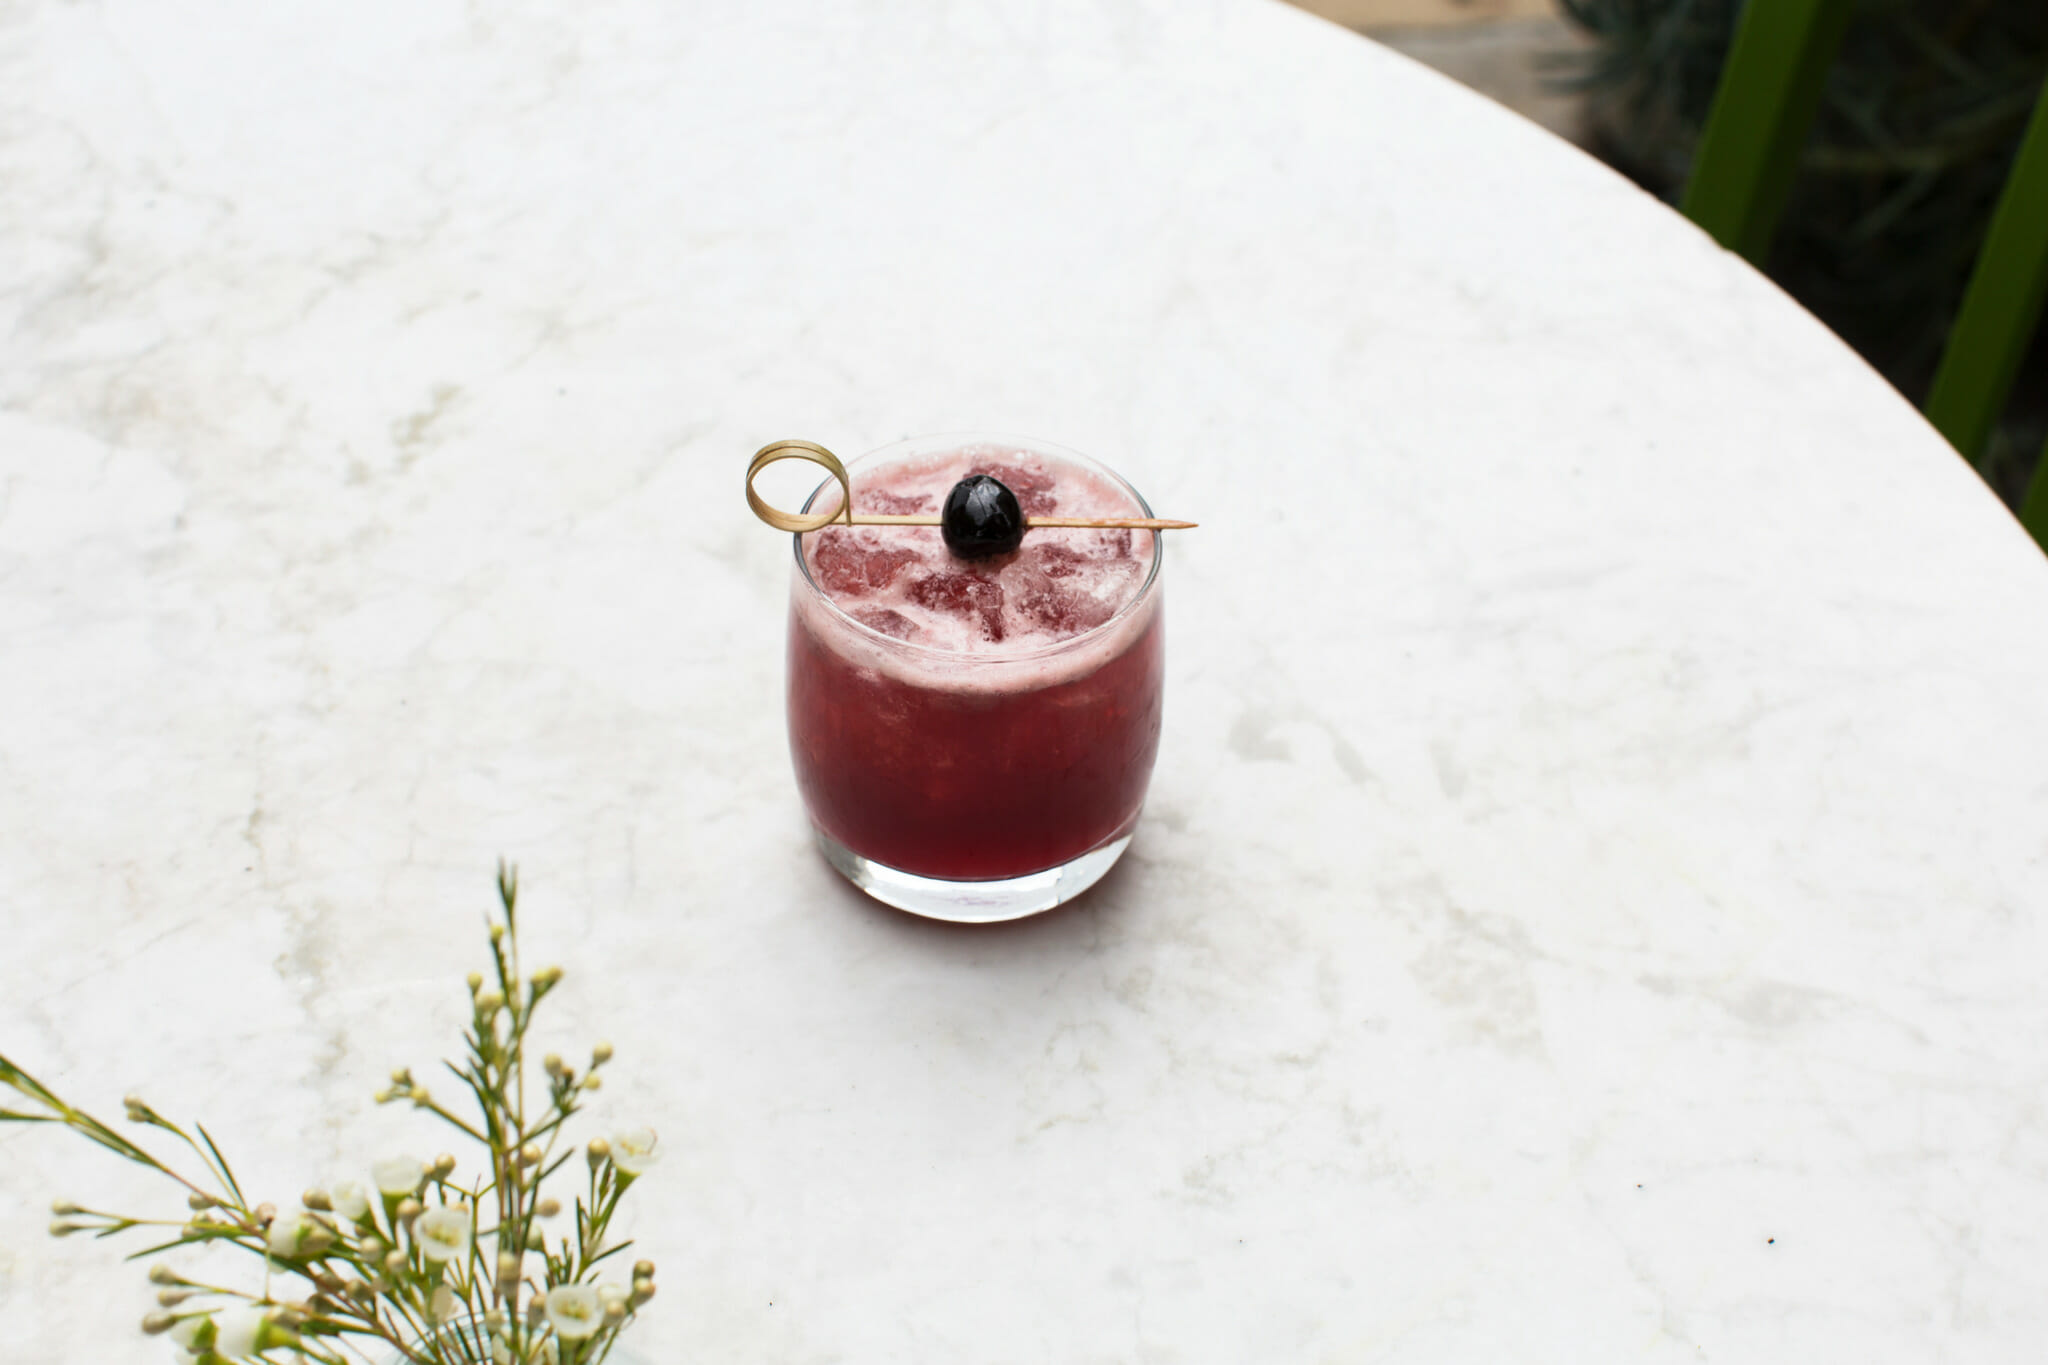 A Berries & Bourbon cocktail from True Food Kitchen.